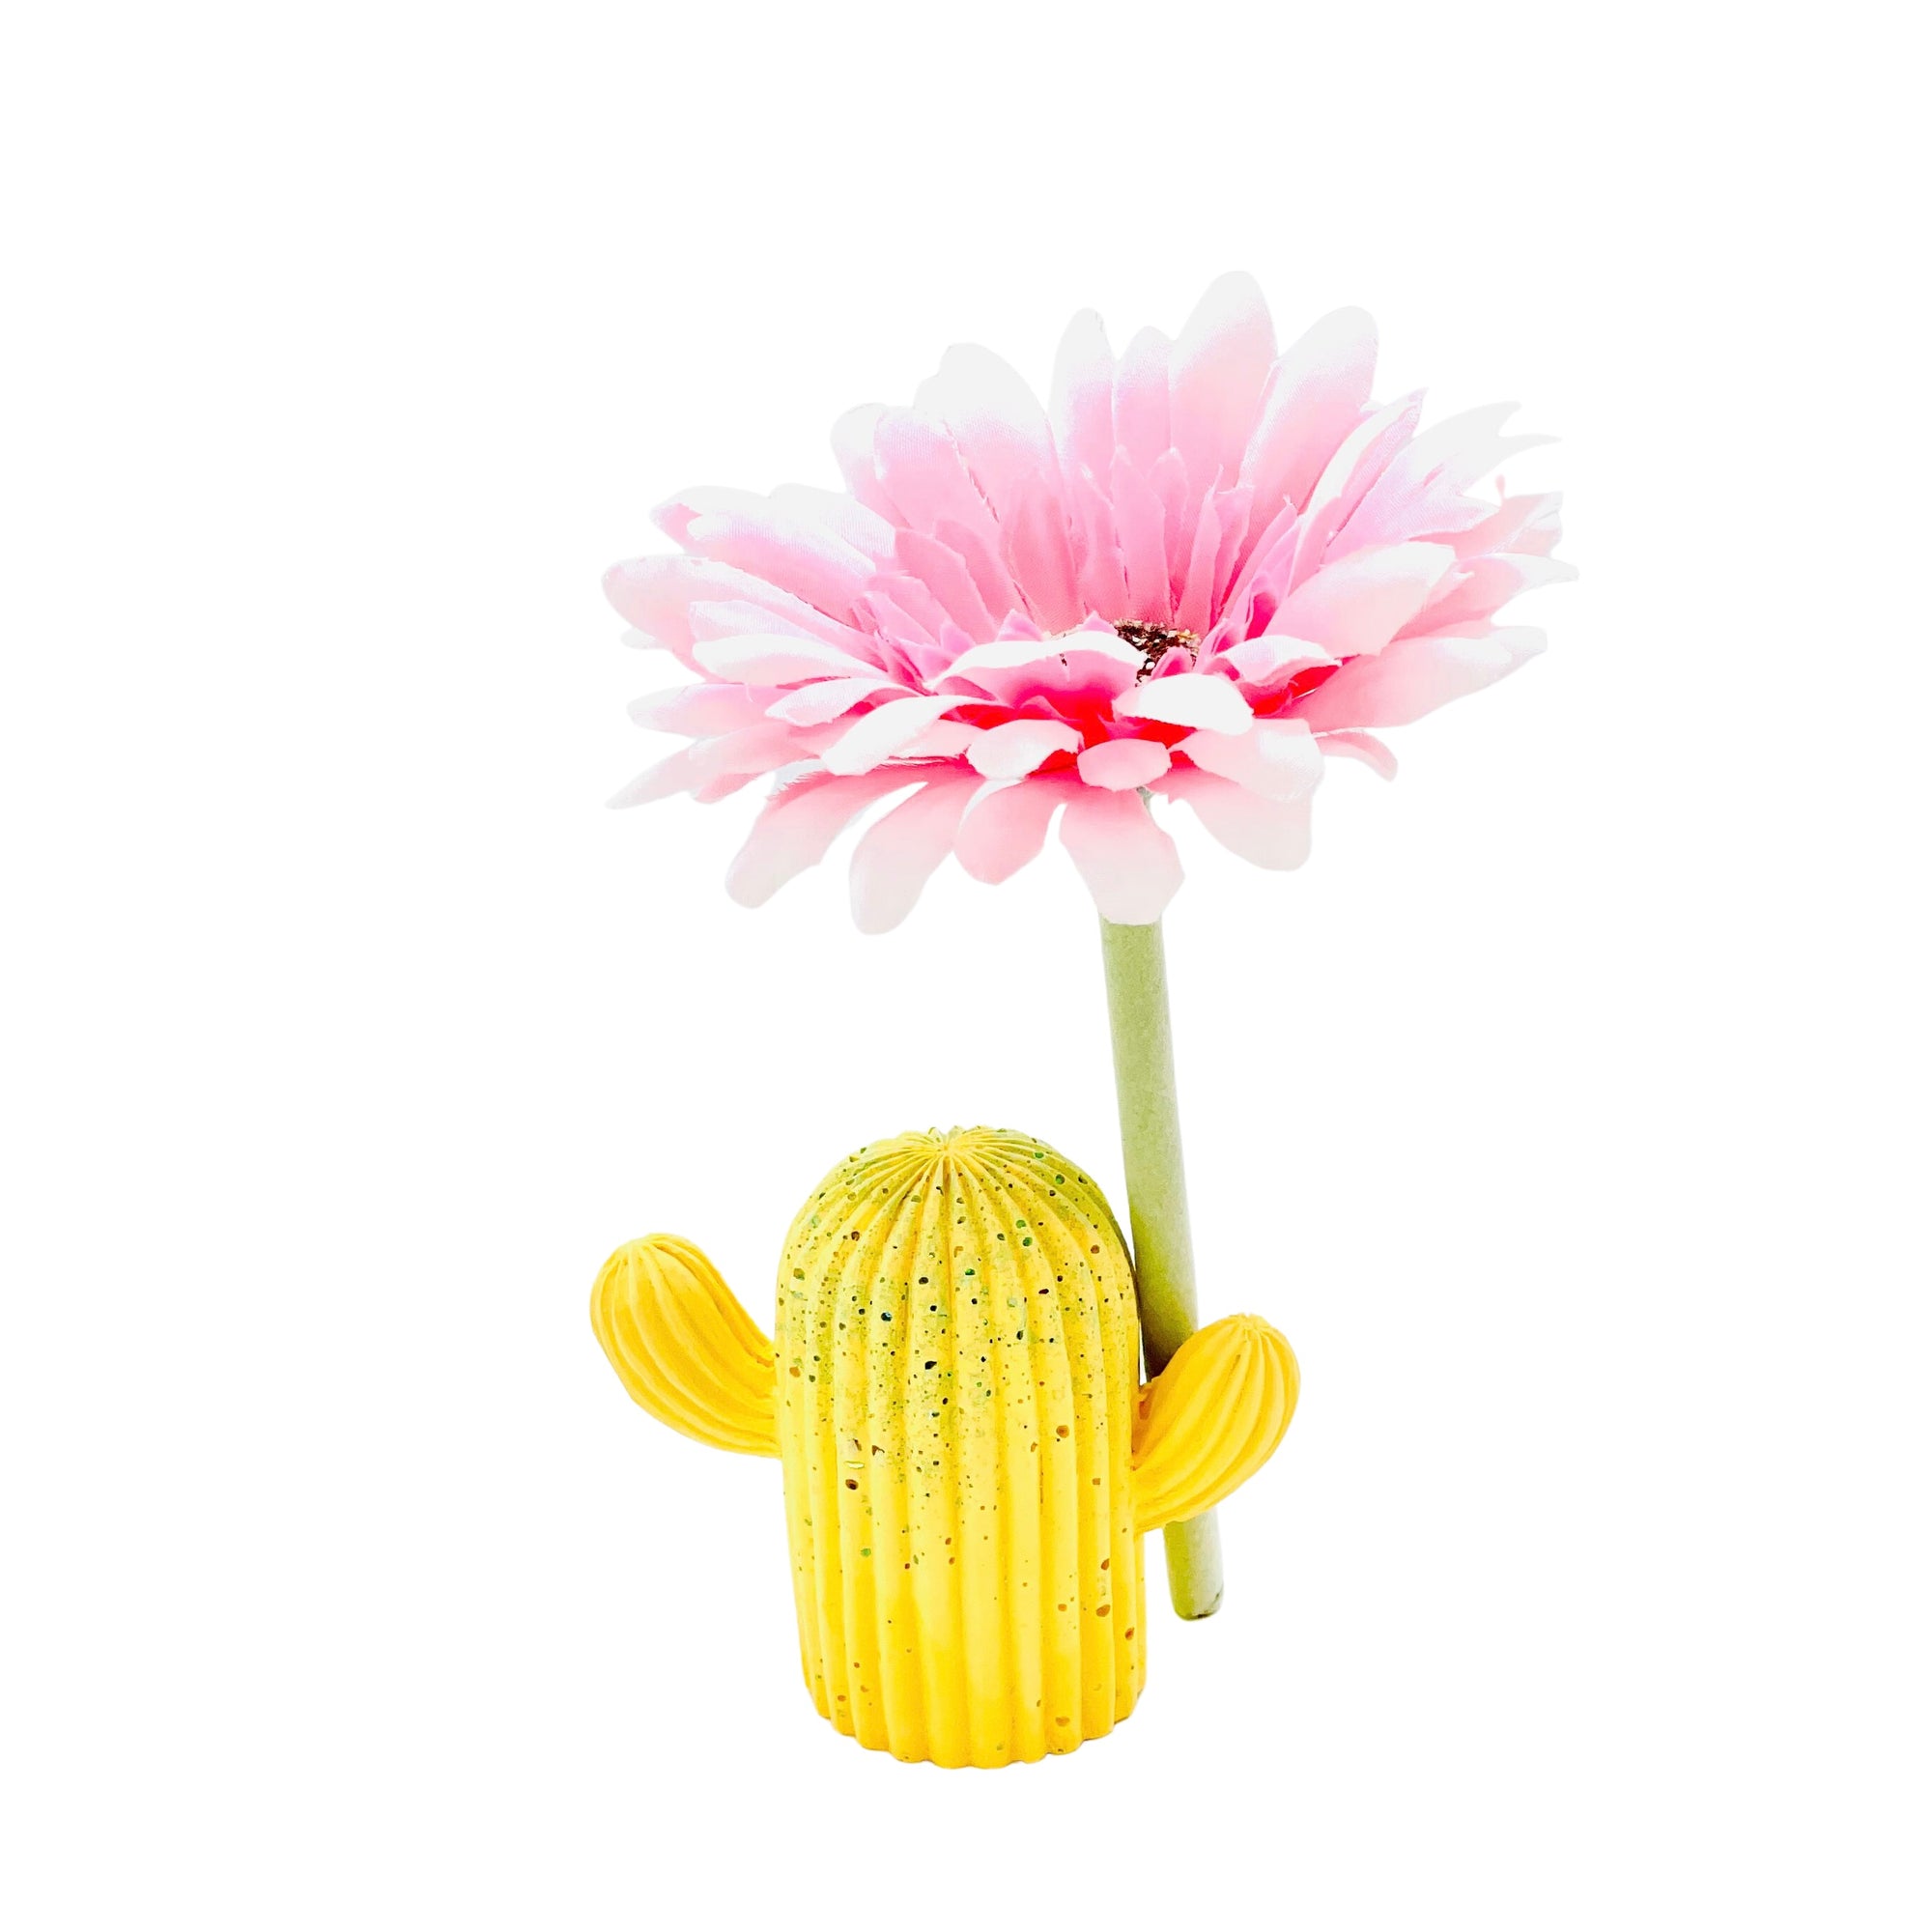 A medium size Jesmonite cactus measuring 7.5cm tall coloured yellow and sprinkled with green glitter.